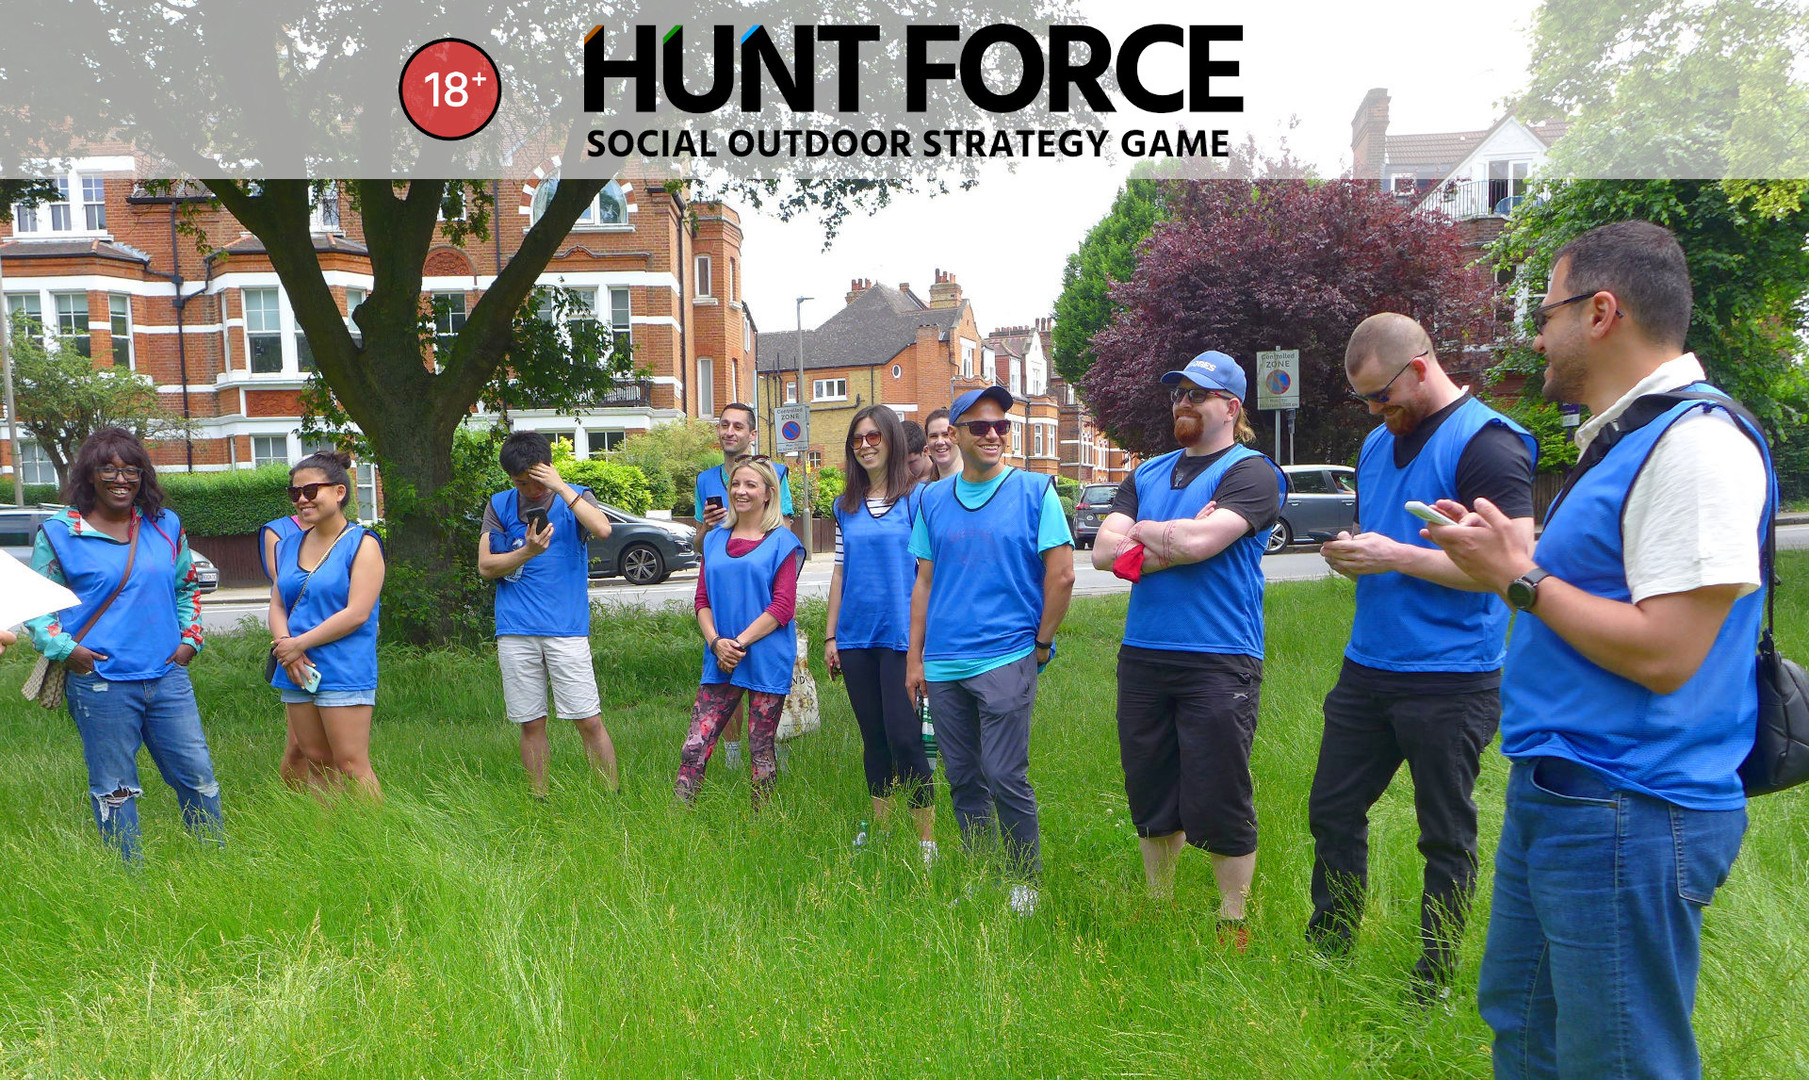 Covertly get to locations while being hunted - Hunt Force, social outdoor game, London, United Kingdom